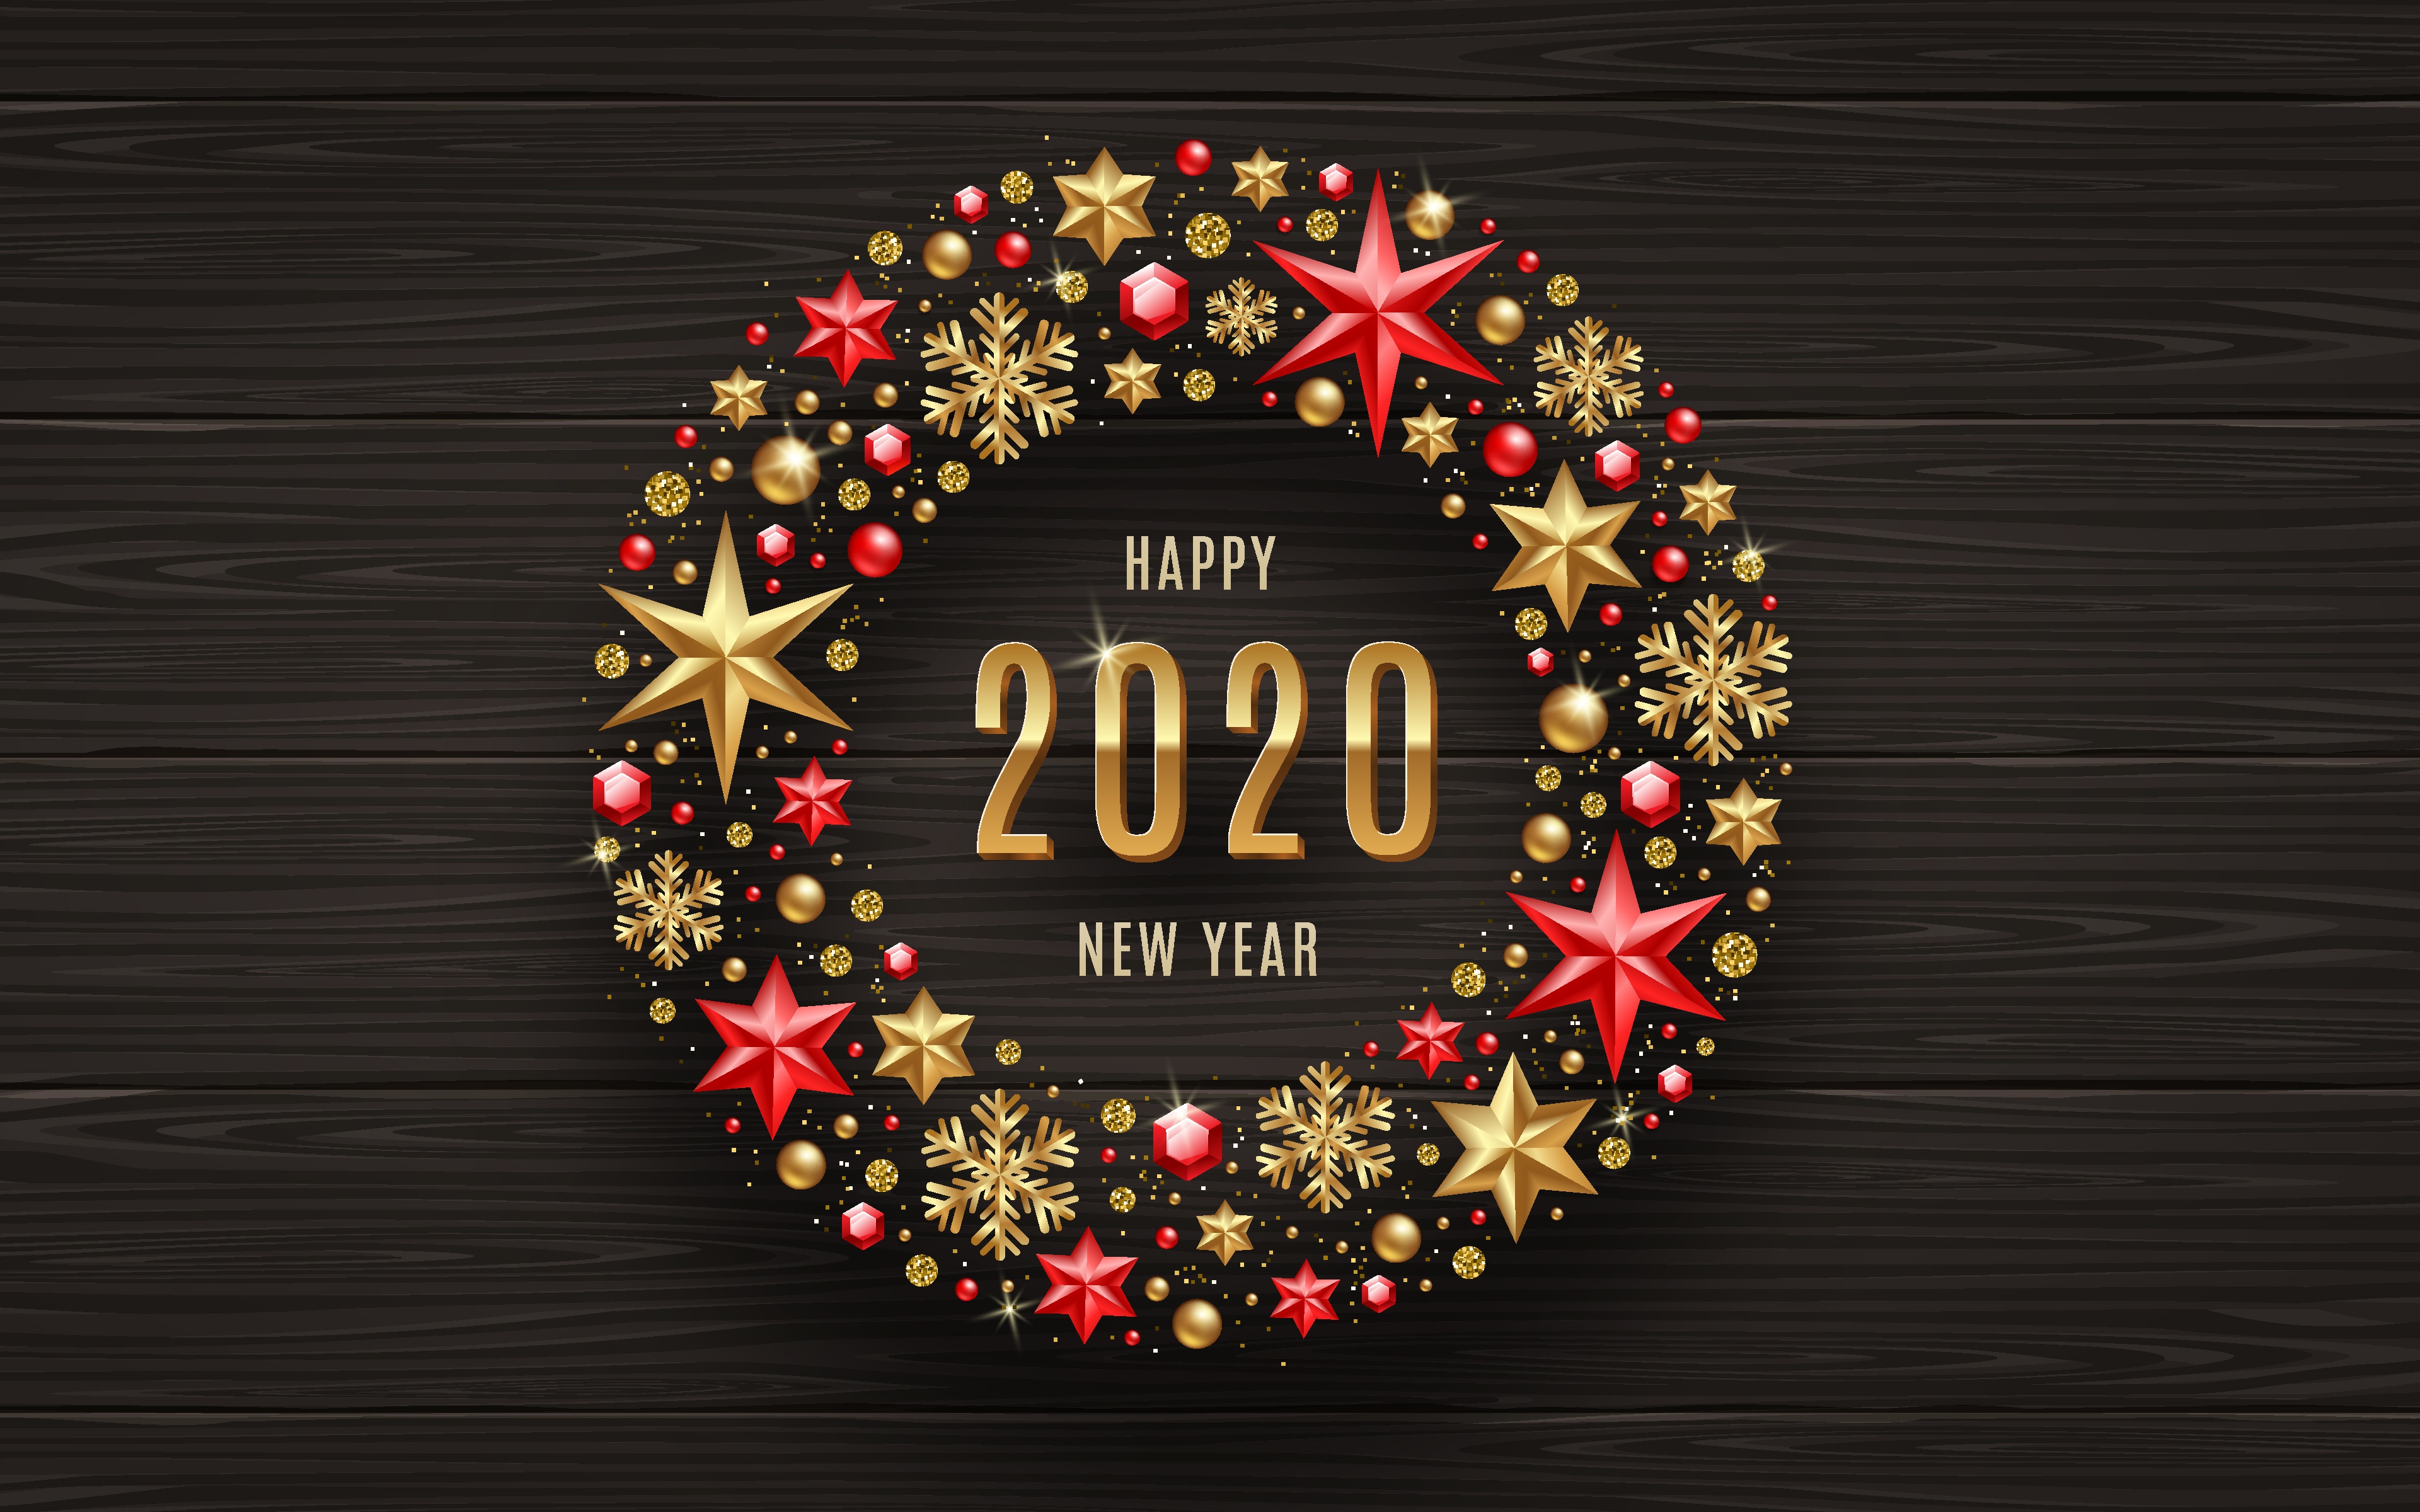 holiday, new year 2020, new year